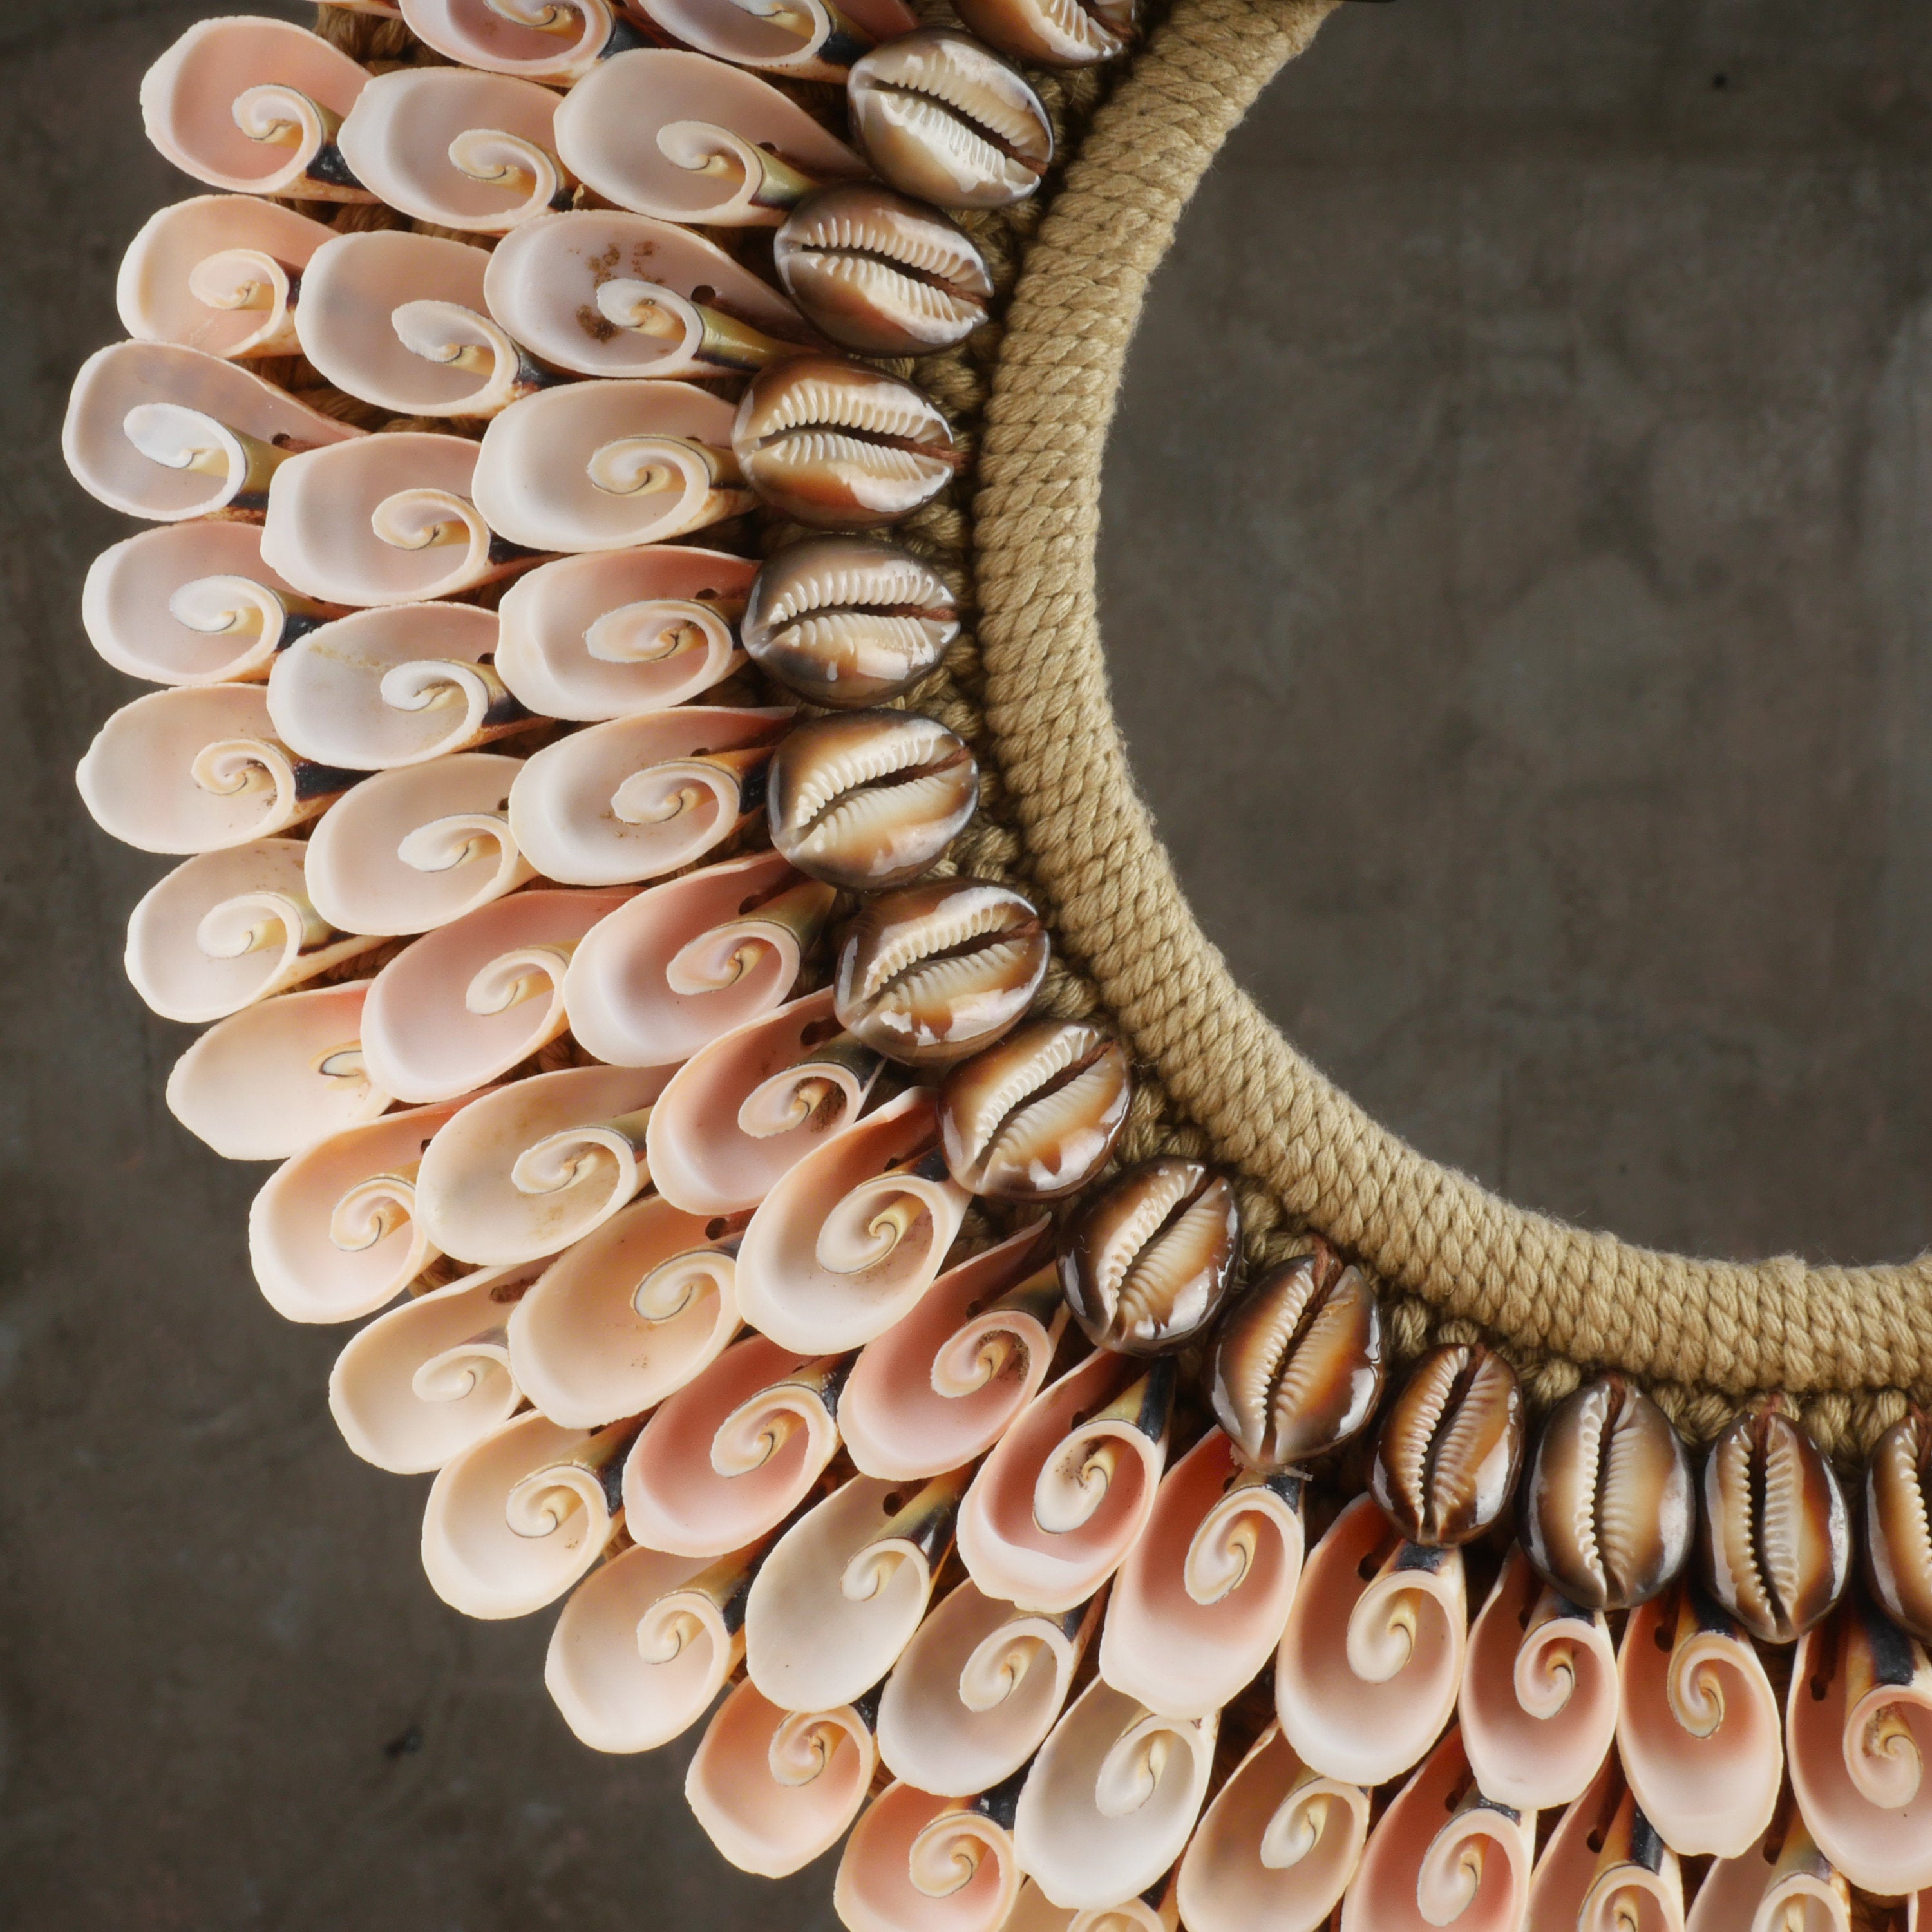 The Pink Conch and Snake Head Necklace - Papua Necklace - Decorative Shell Necklace